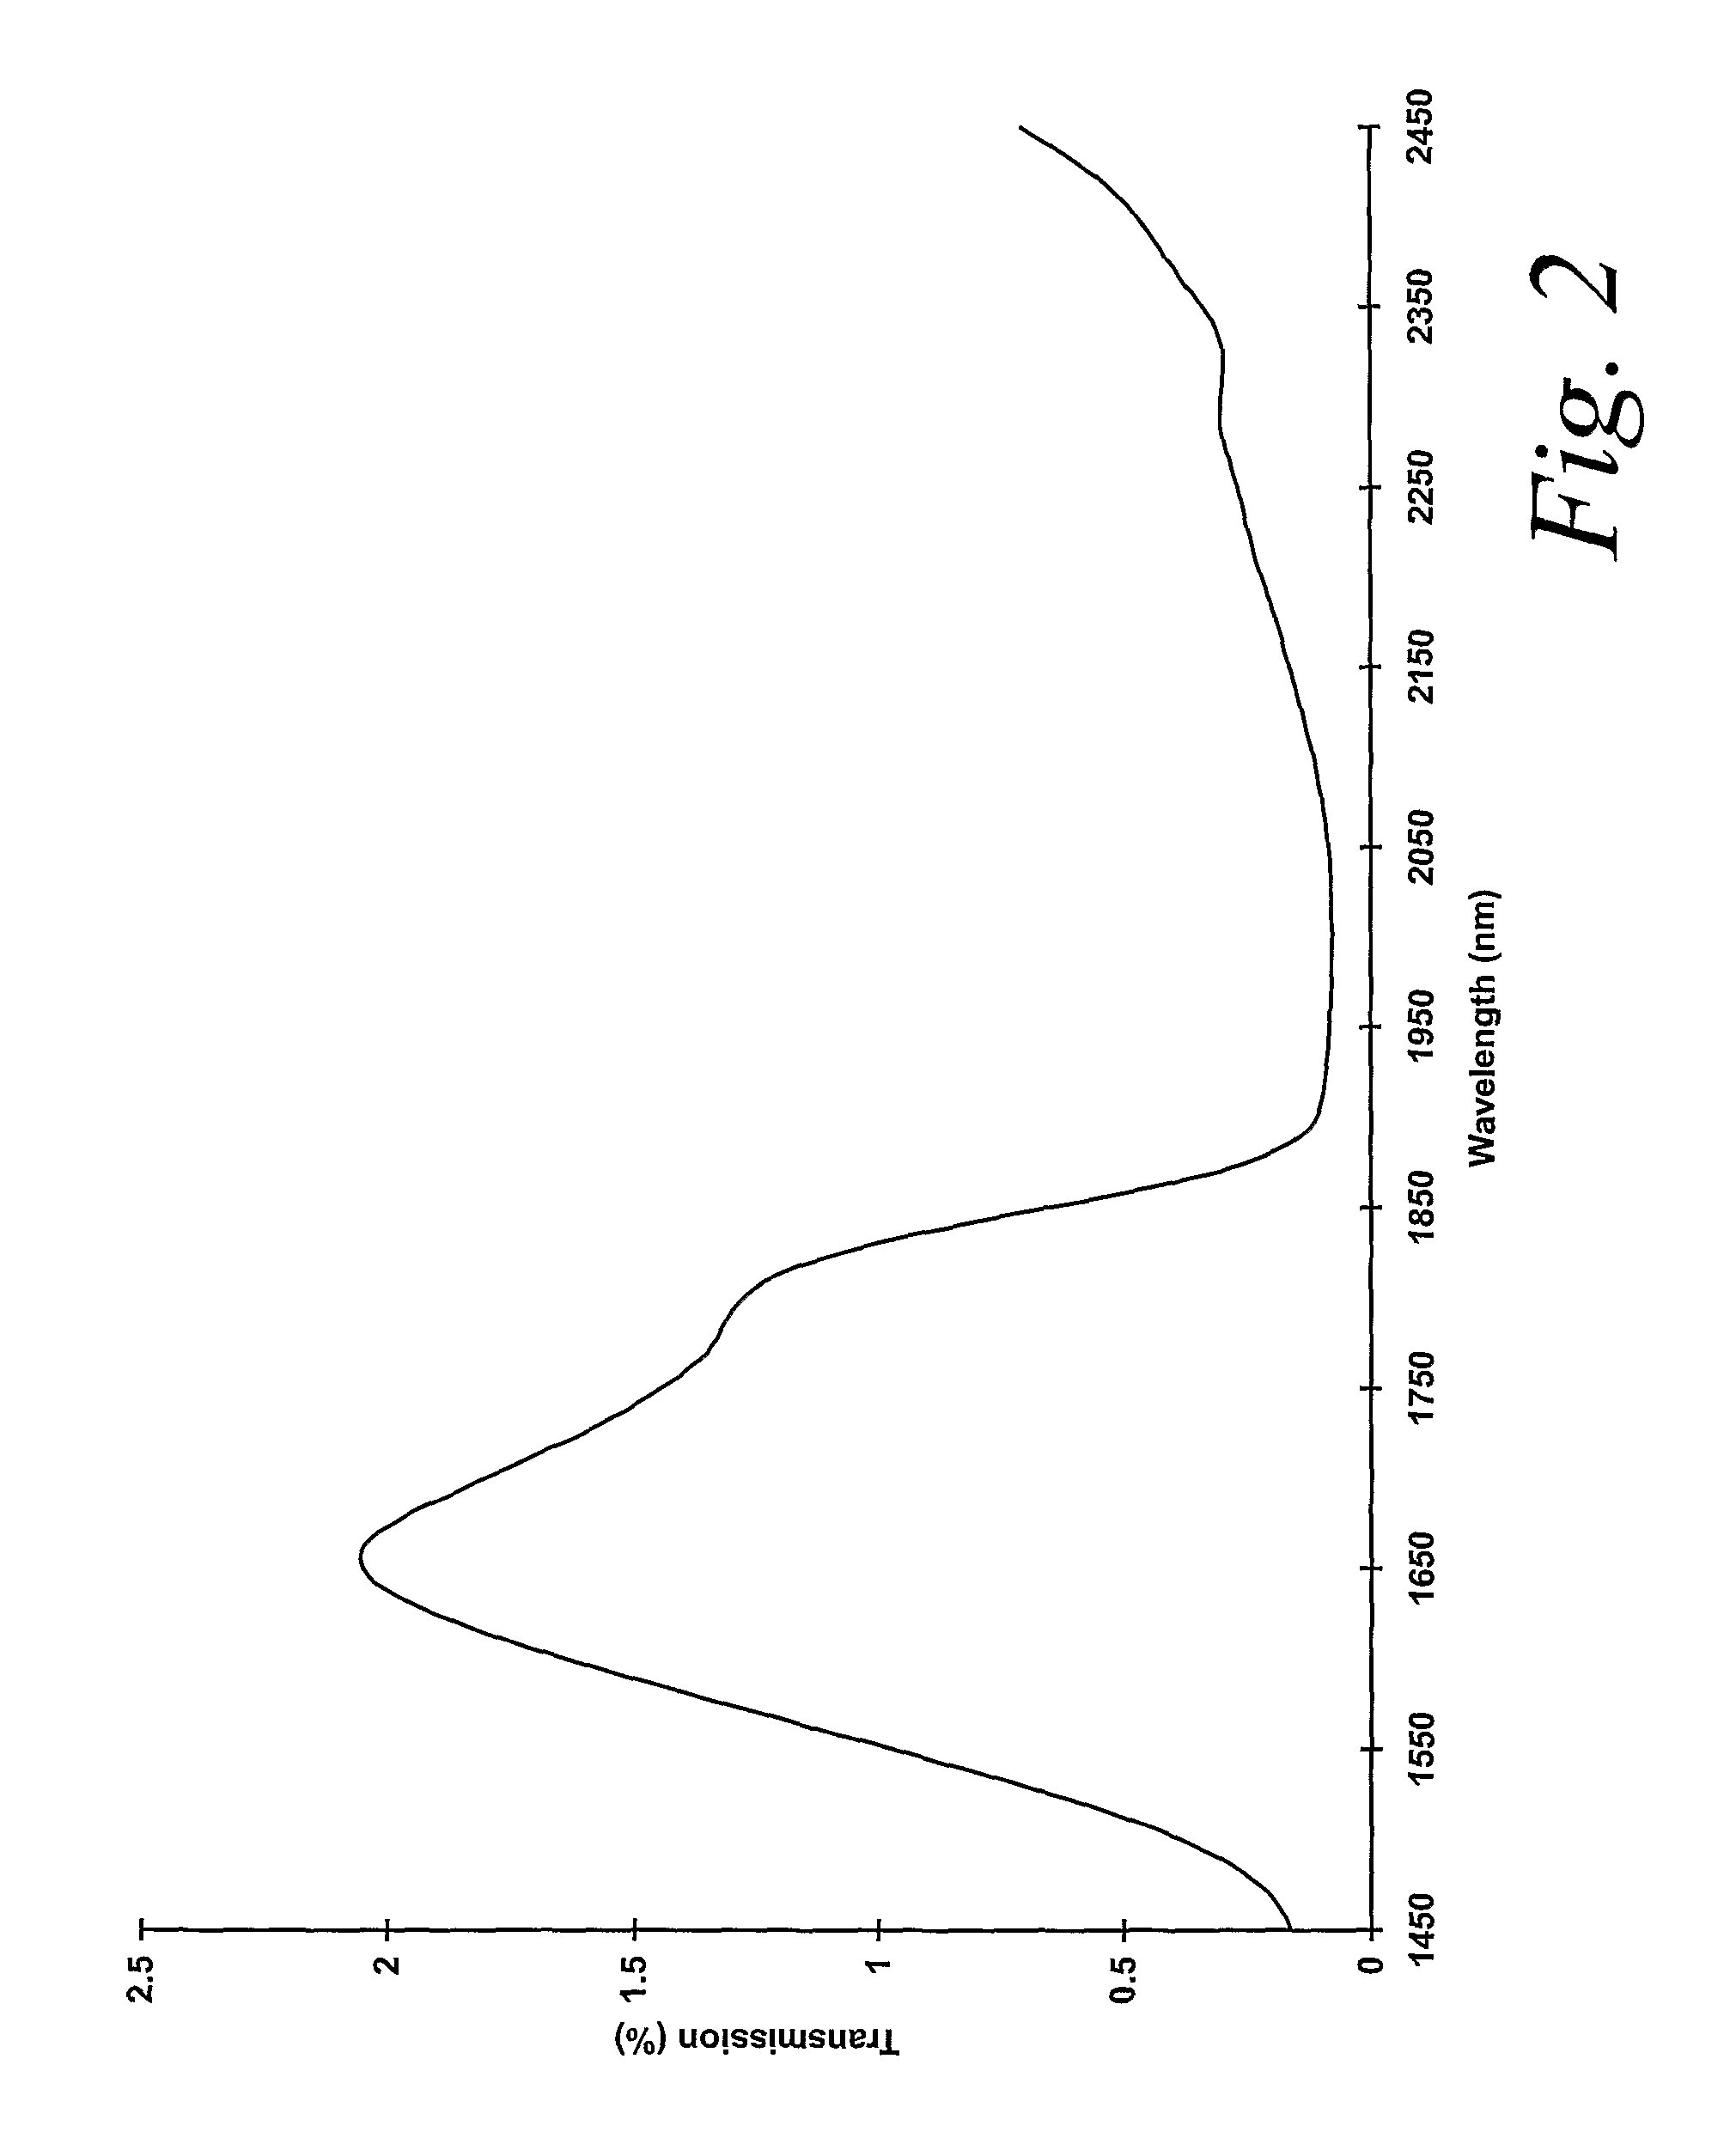 Non-invasive system and method for measuring an analyte in the body